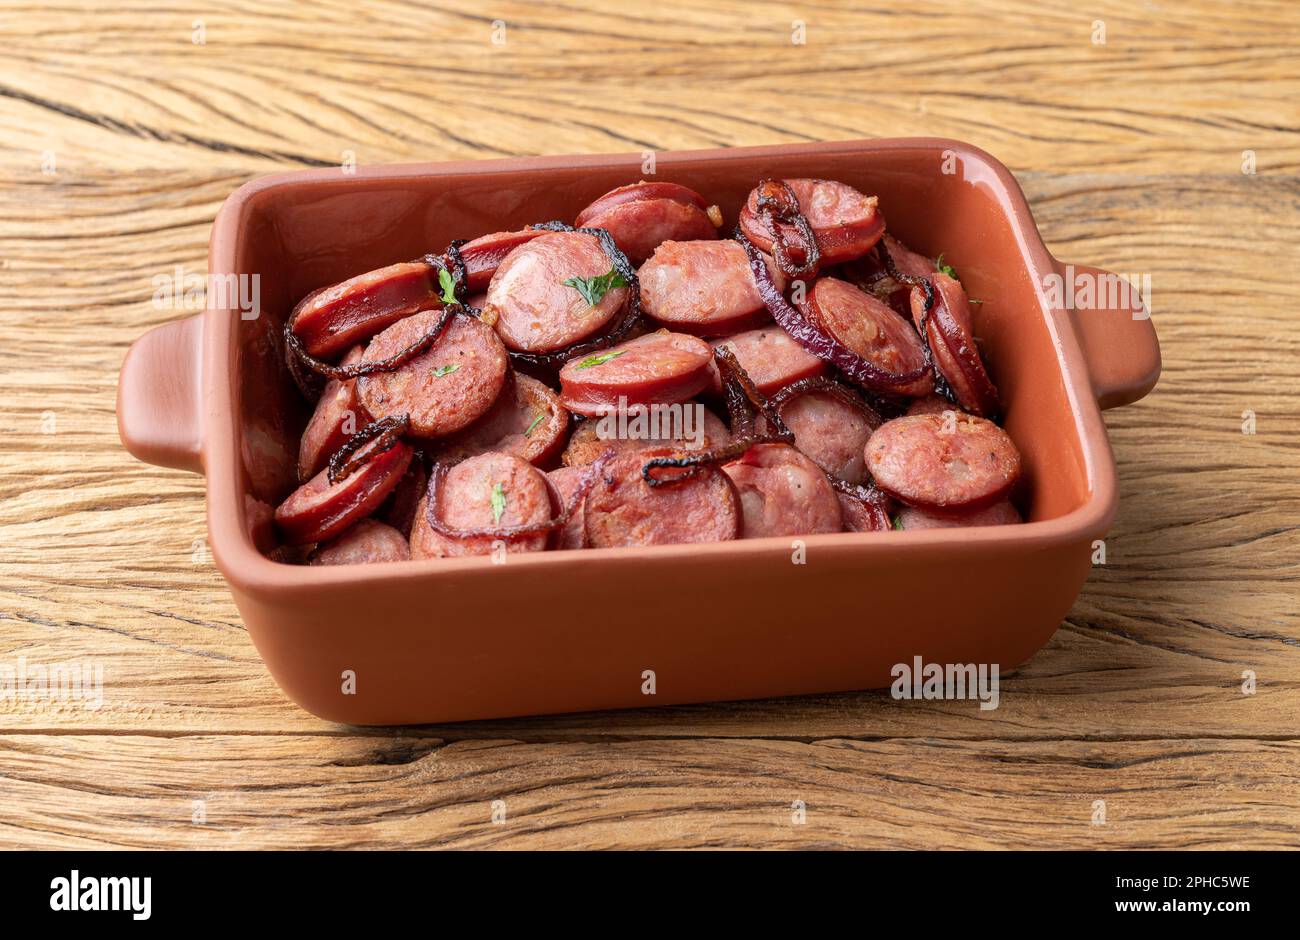 Grilled calabrese sausage portion with onion over wooden table. Stock Photo